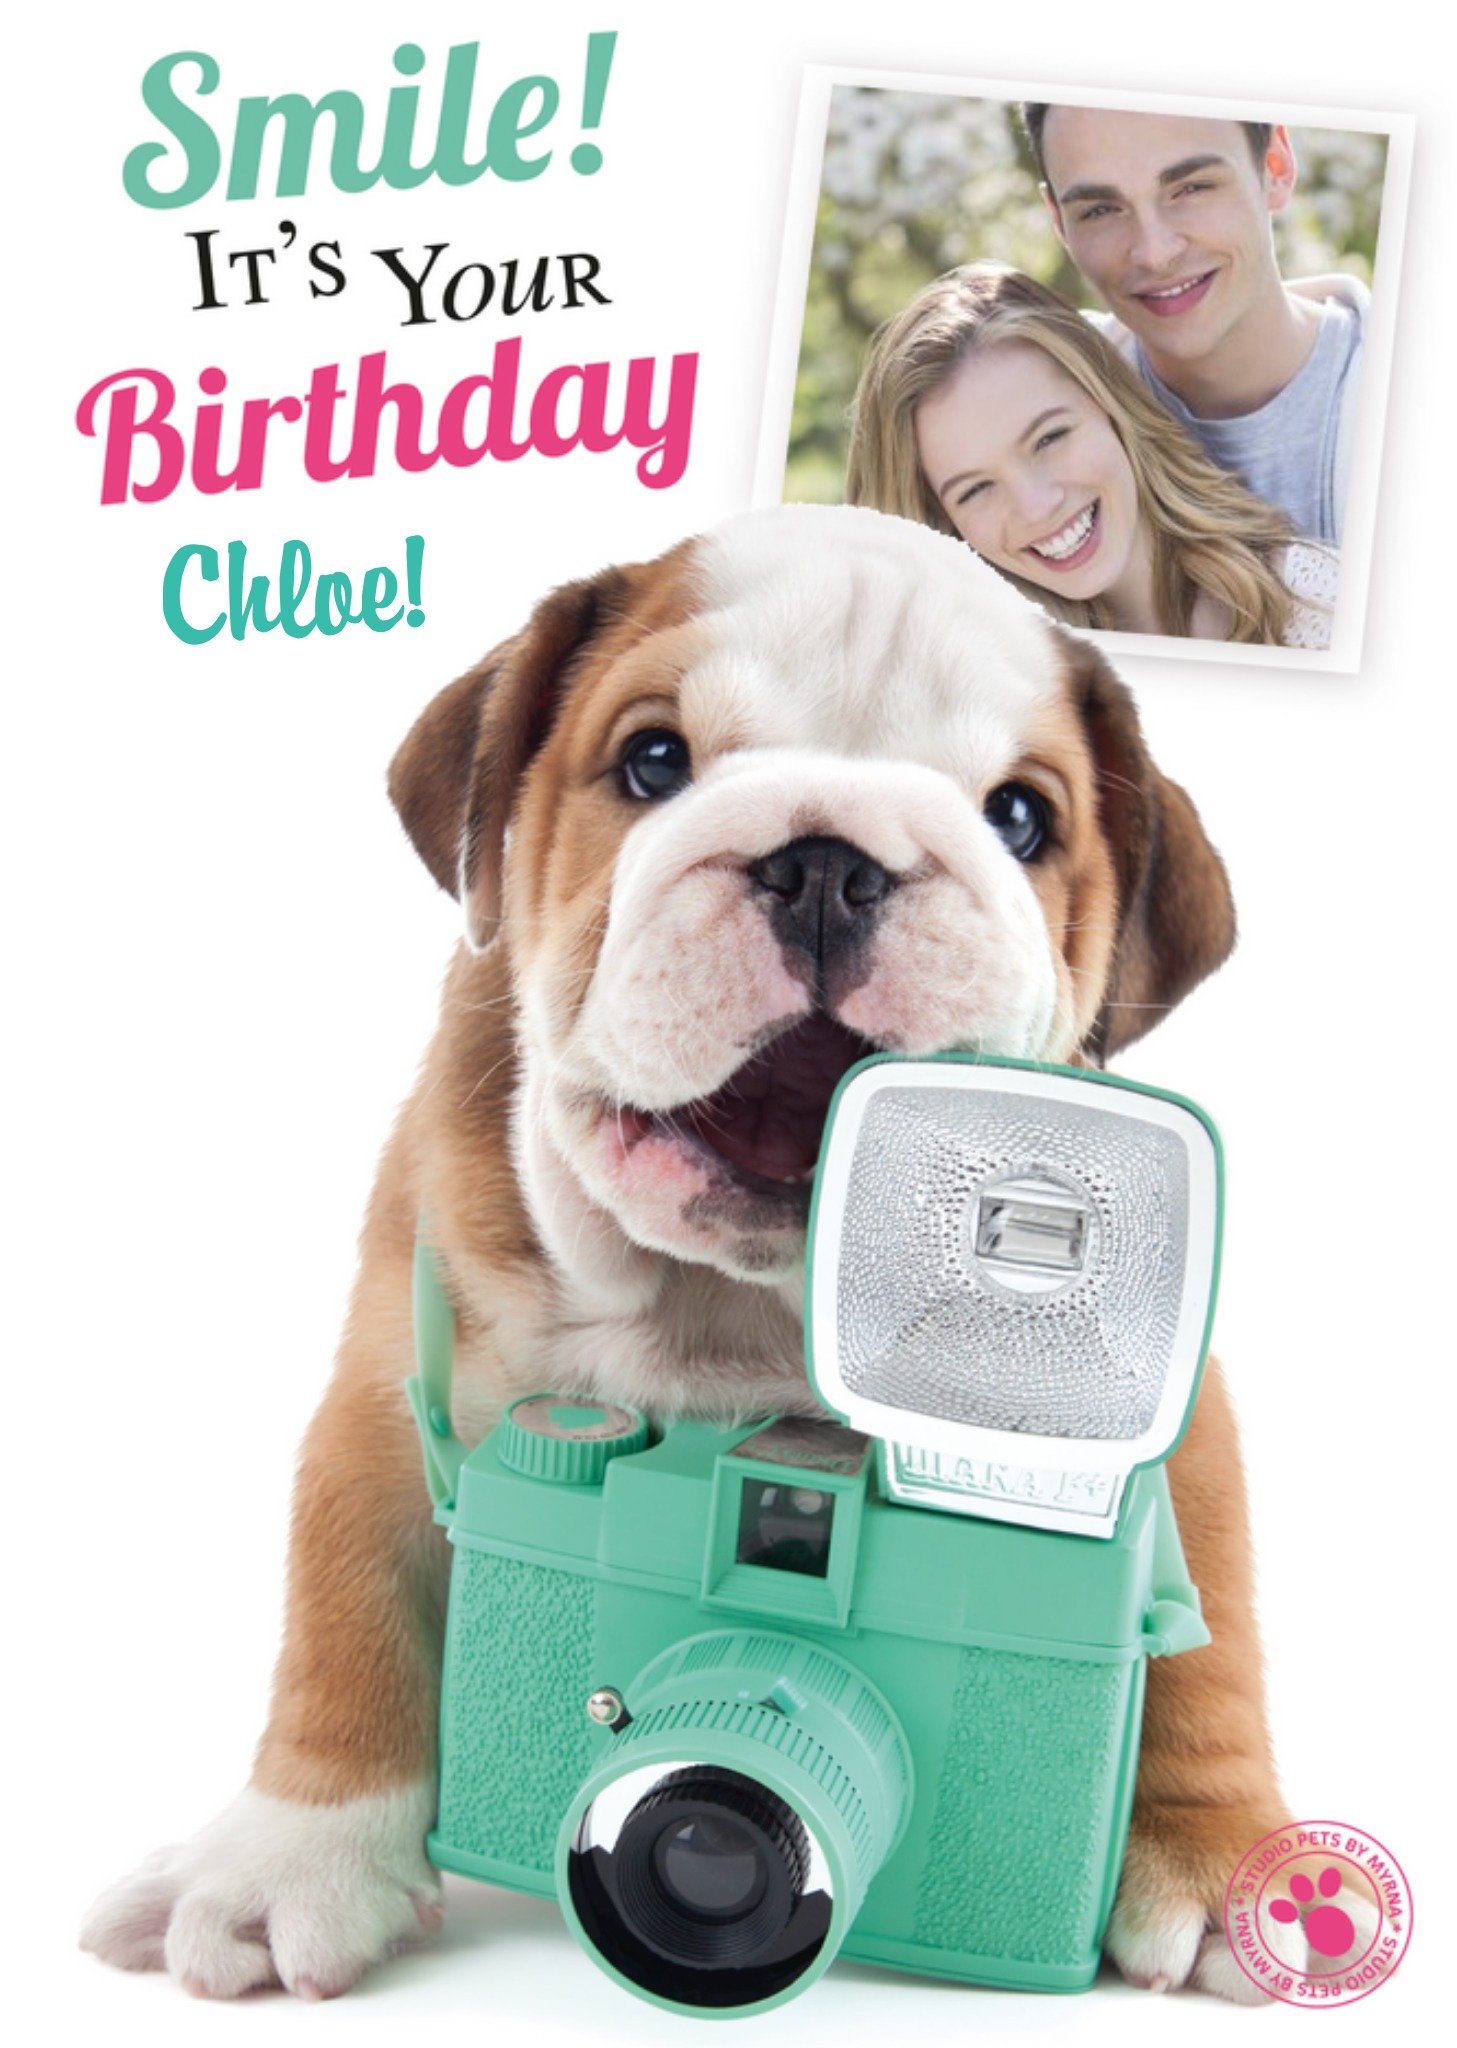 Studio Pets Puppy Behind The Camera Happy Birthday Photo Card, Large